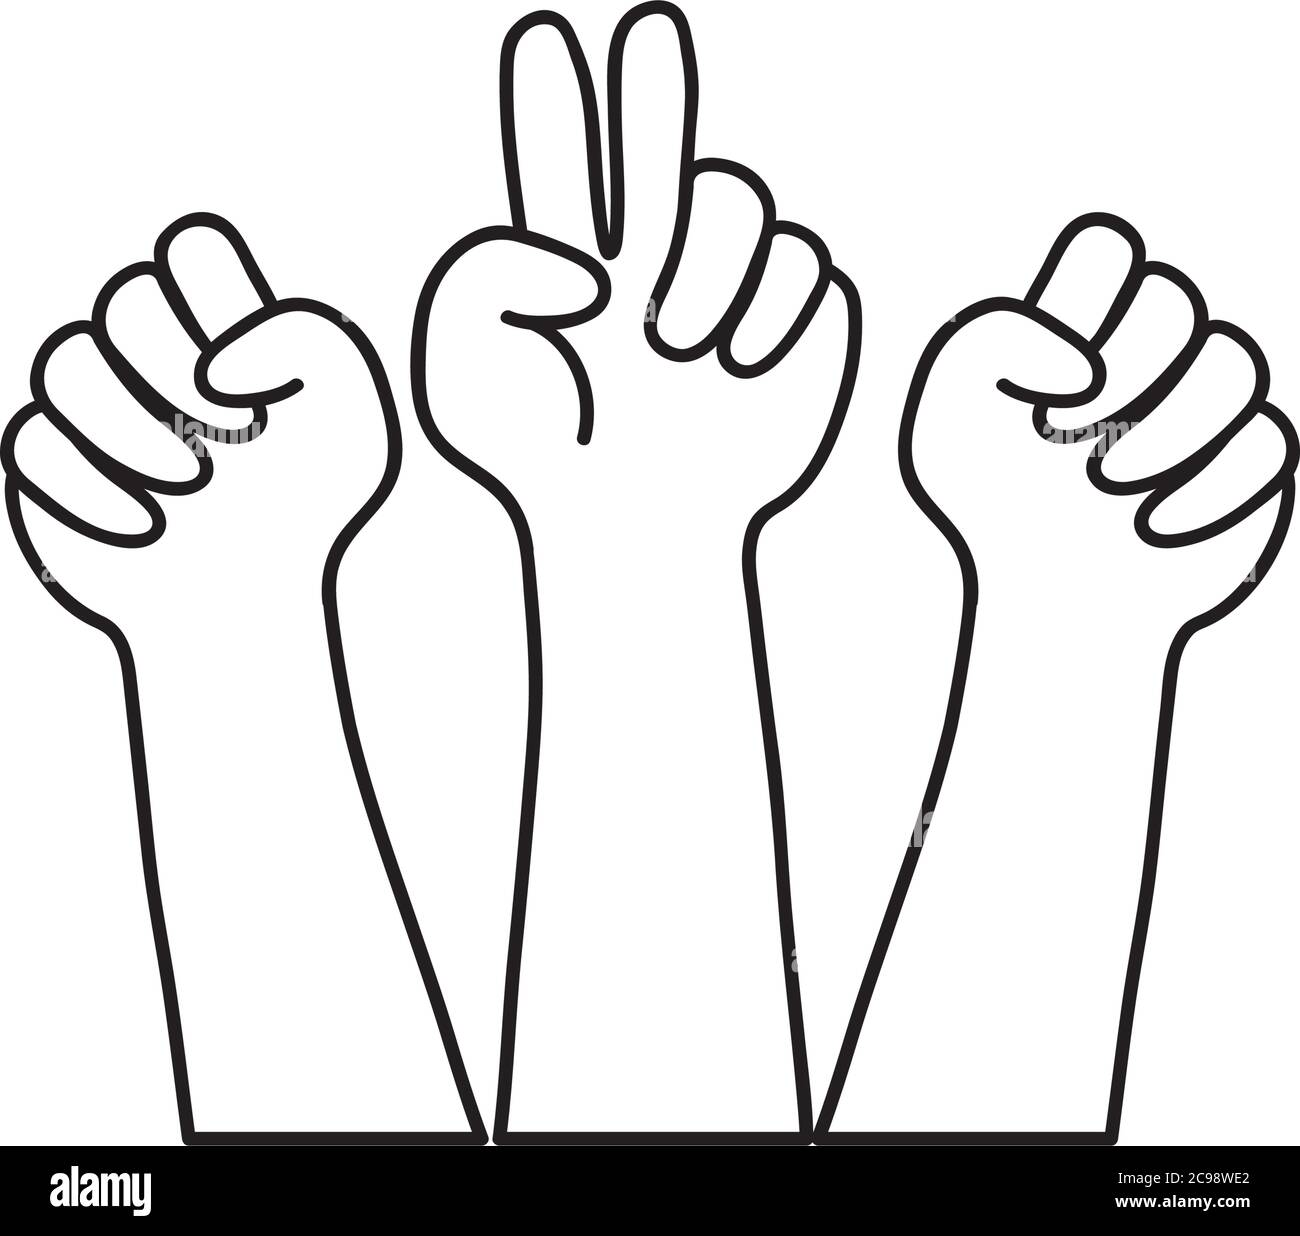 icon of hands with protesting gestures over white background, line style, vector illustration Stock Vector